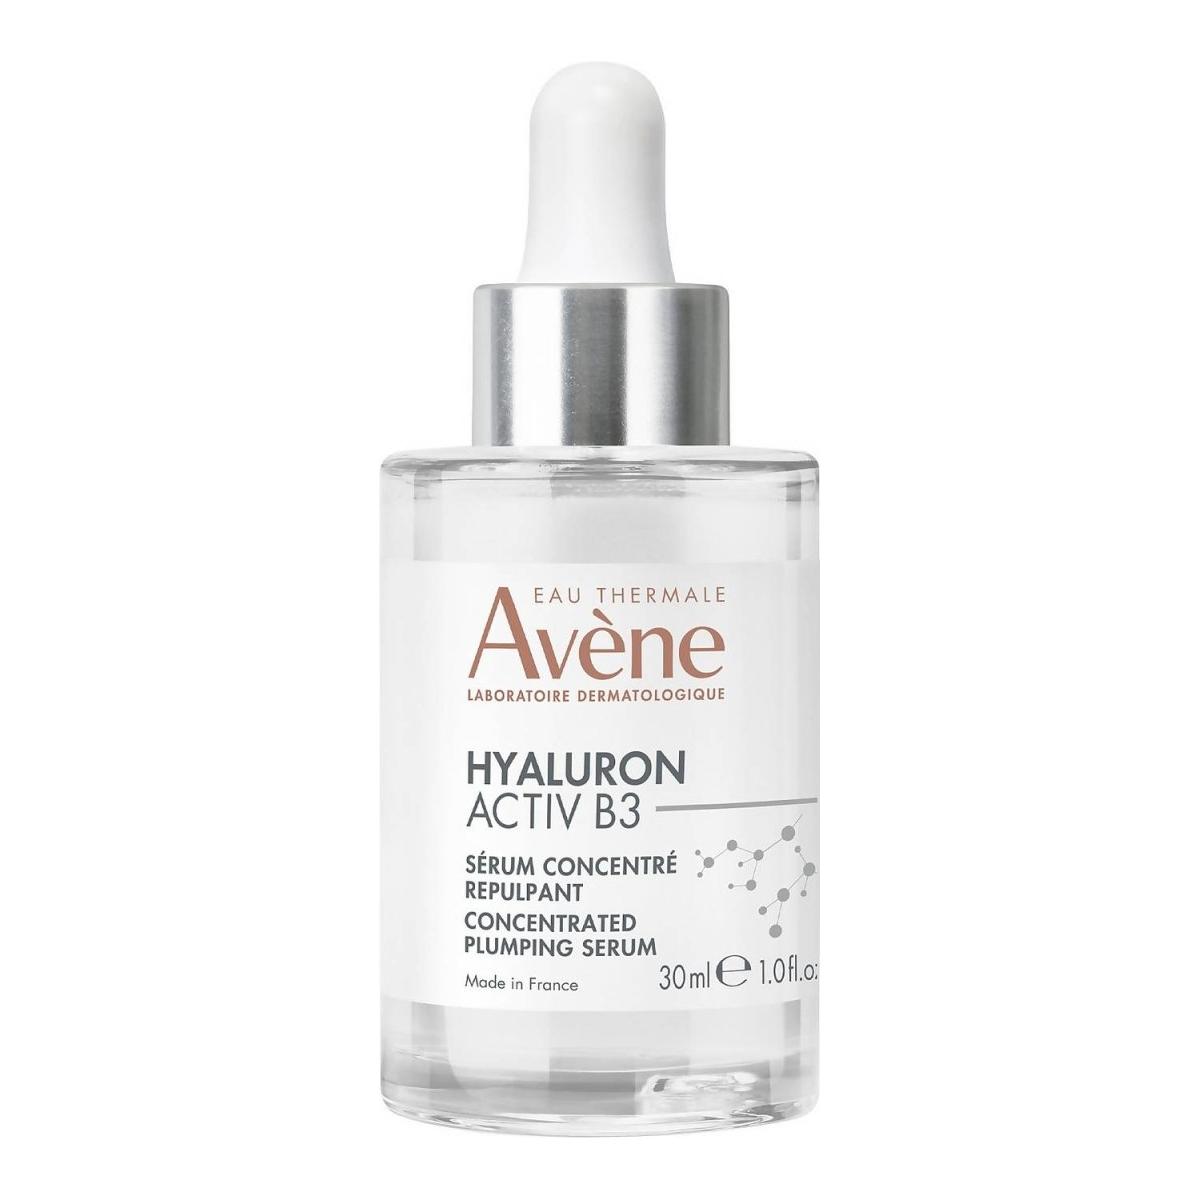 Avène Face Hyaluron Activ B3 Concentrated Plumping Serum 30ml - Glam Global UK